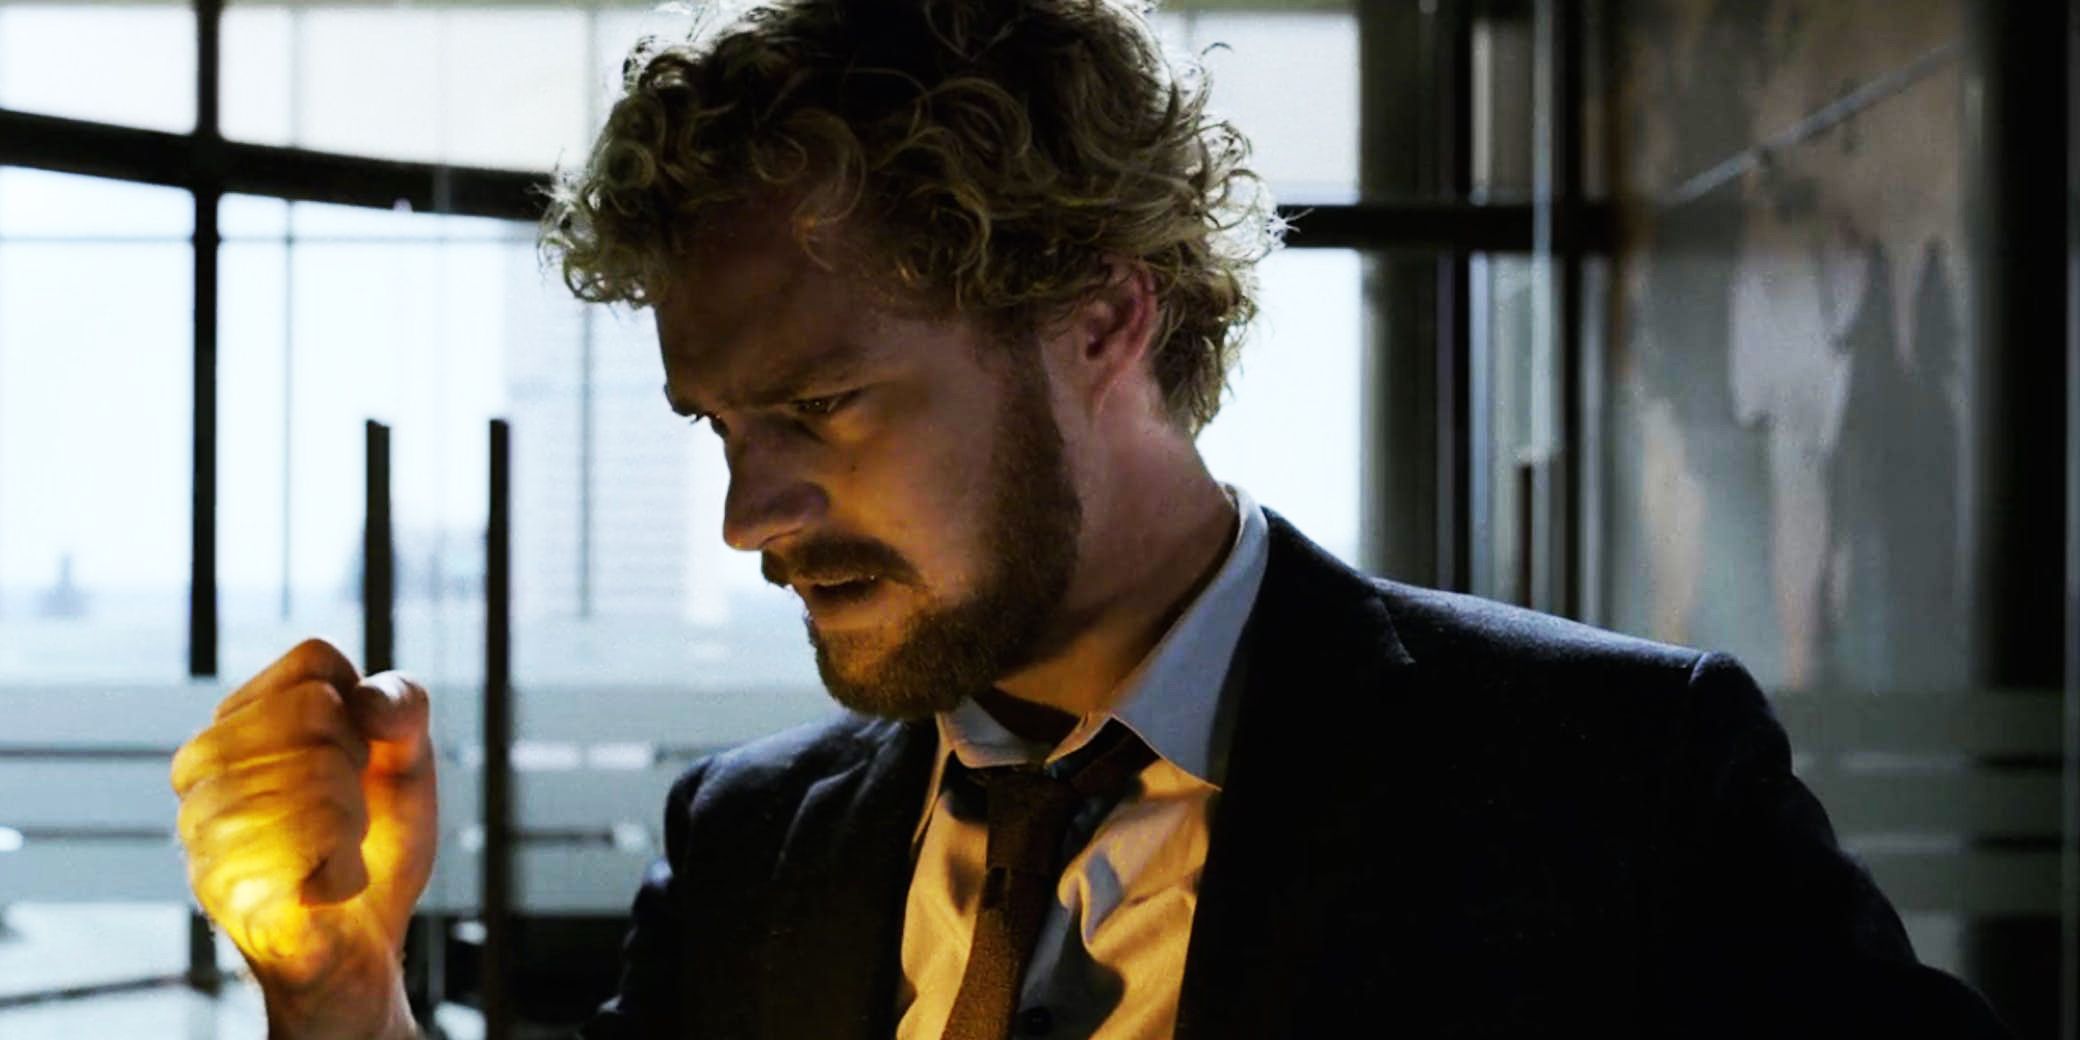 Iron Fist Season One Is Uneven, Has Chance to Grow